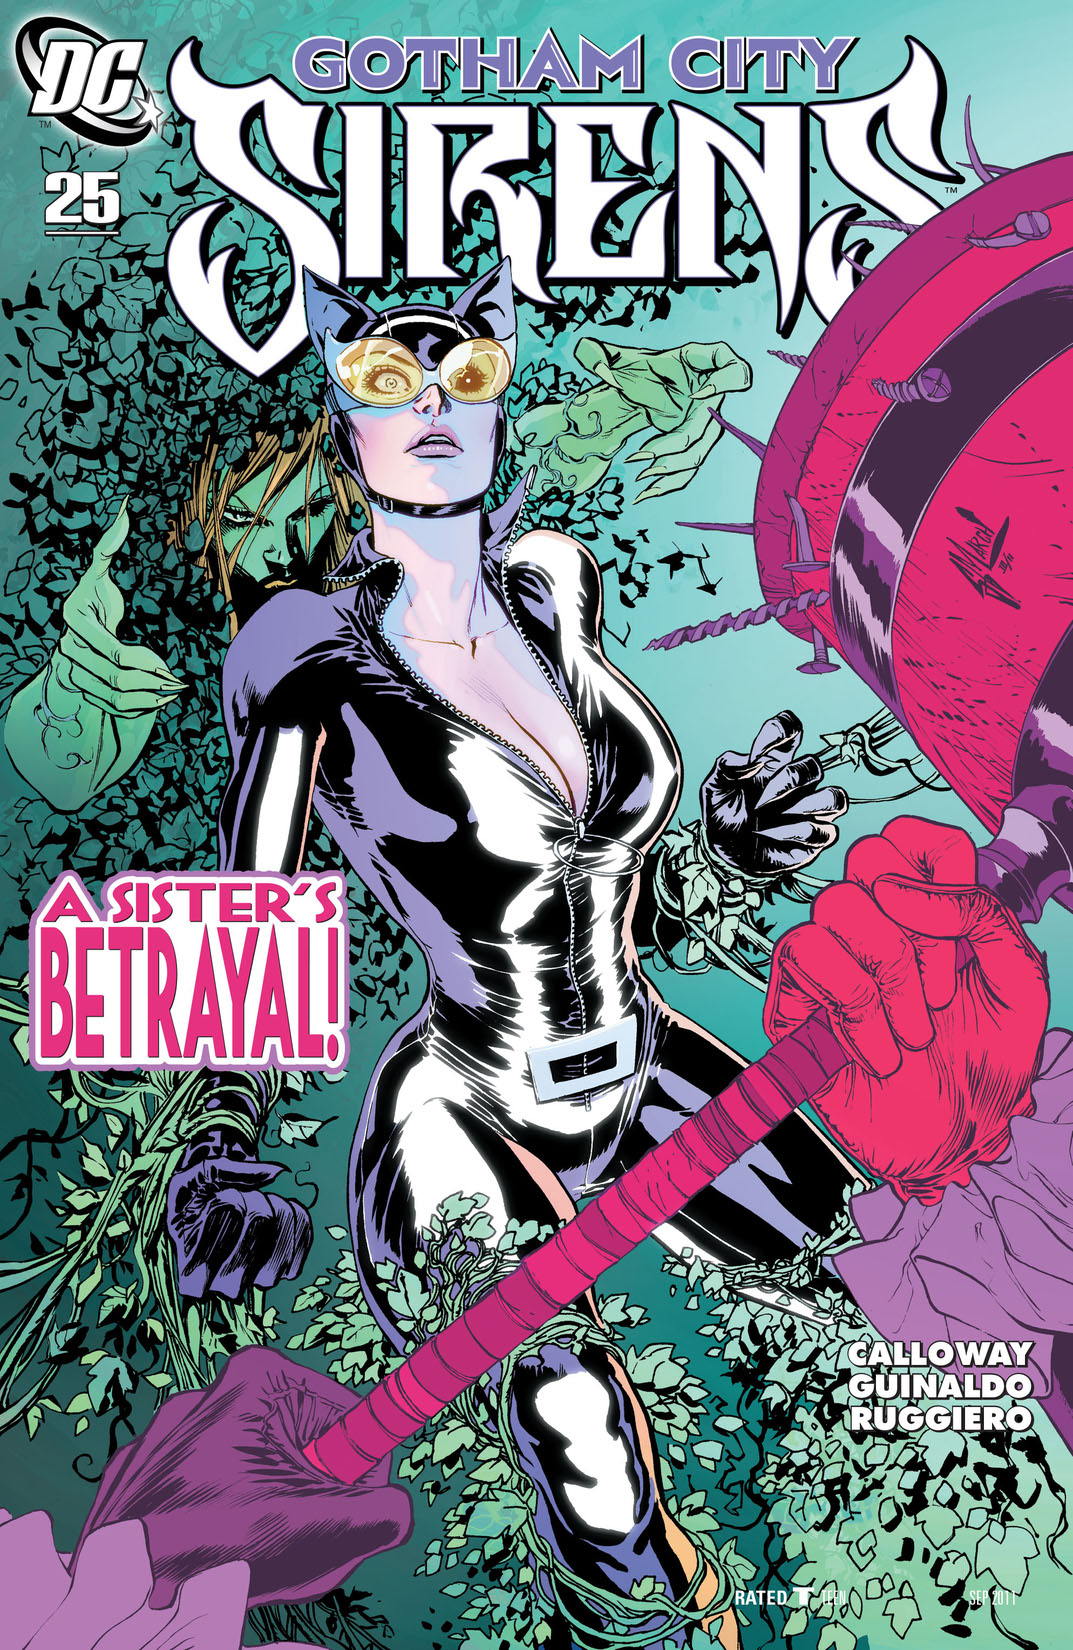 Gotham City Sirens #25 preview images